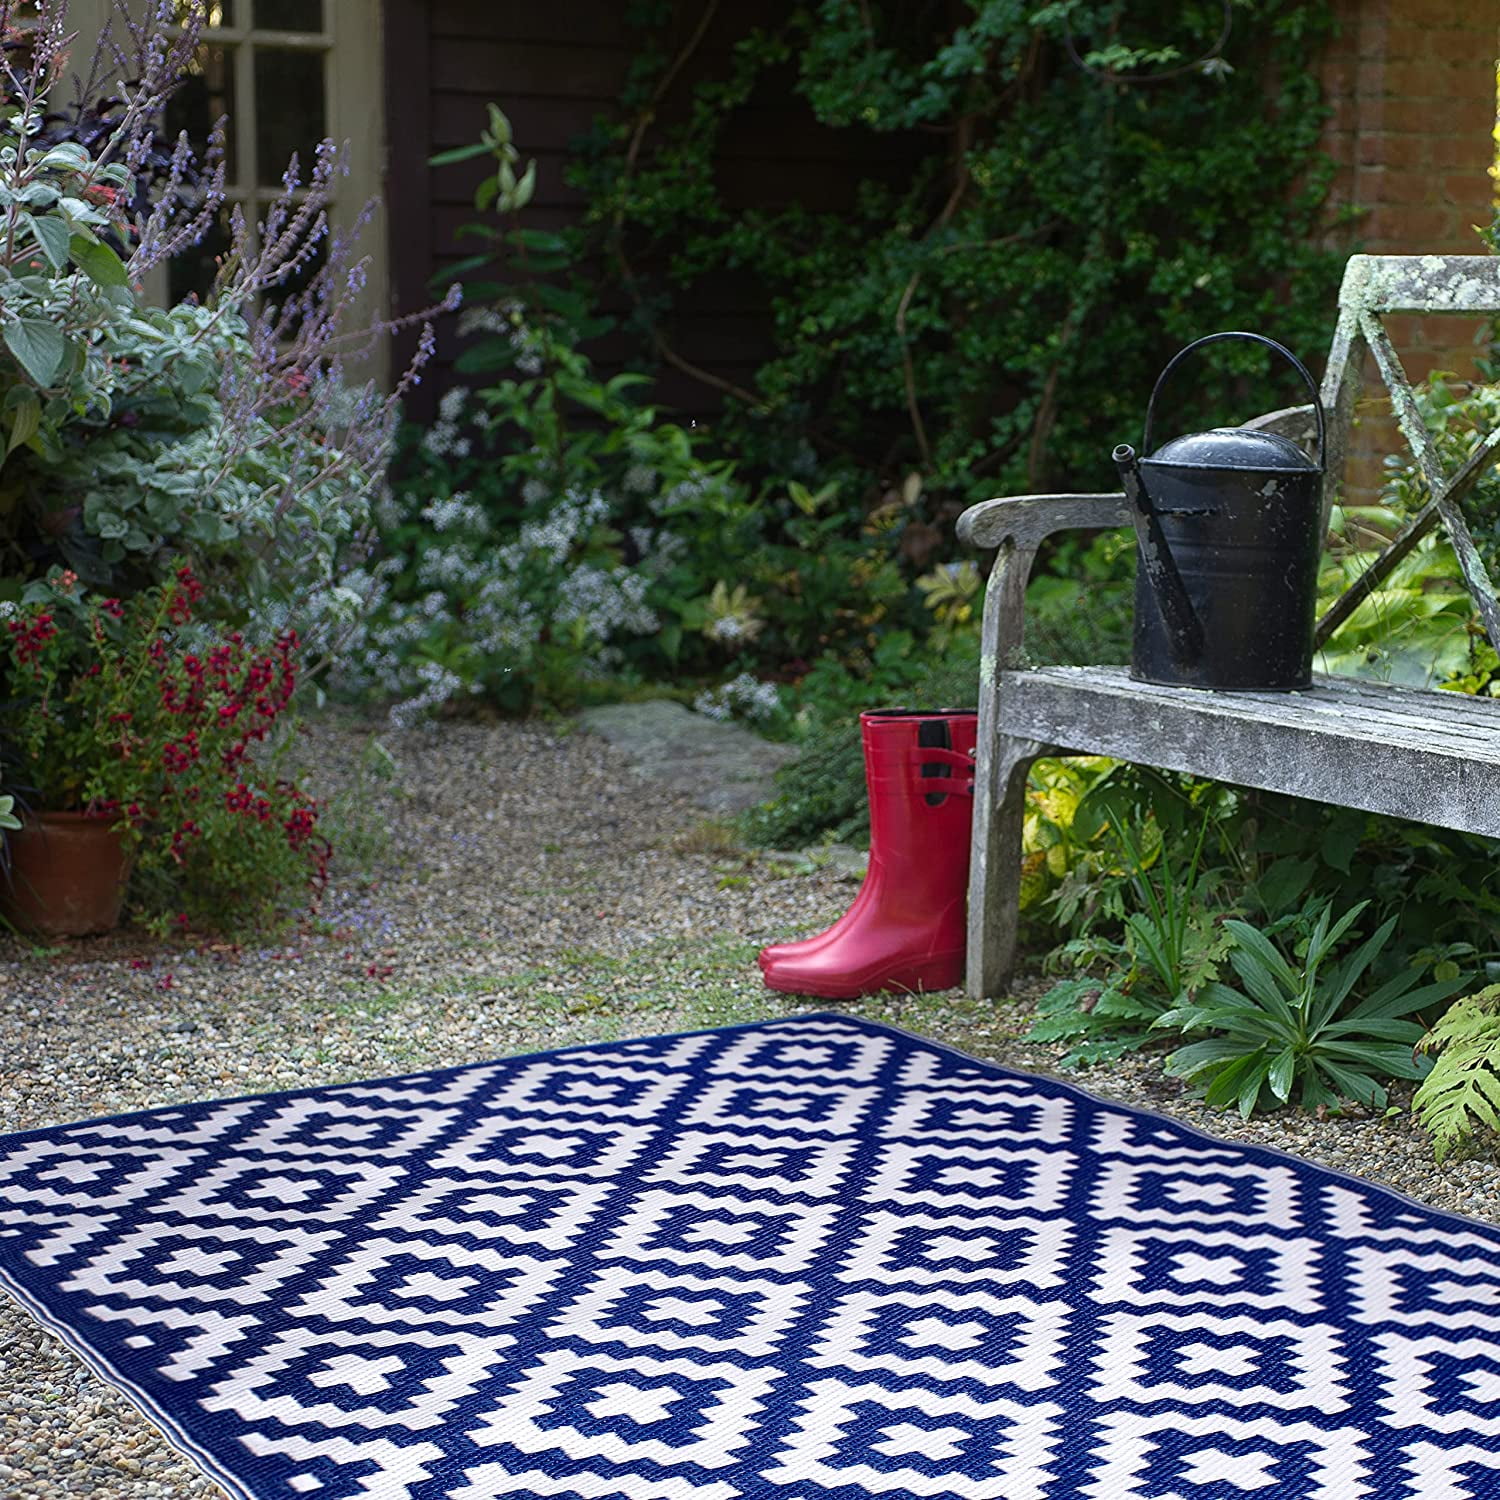 FH Home Outdoor Rug - Waterproof, Fade Resistant, Crease-Free - Premium  Recycled Plastic - Geometric - Porch, Deck, Balcony, Mudroom, Laundry Room,  Patio - Aztec - Blue & White - 3 x 5 ft 